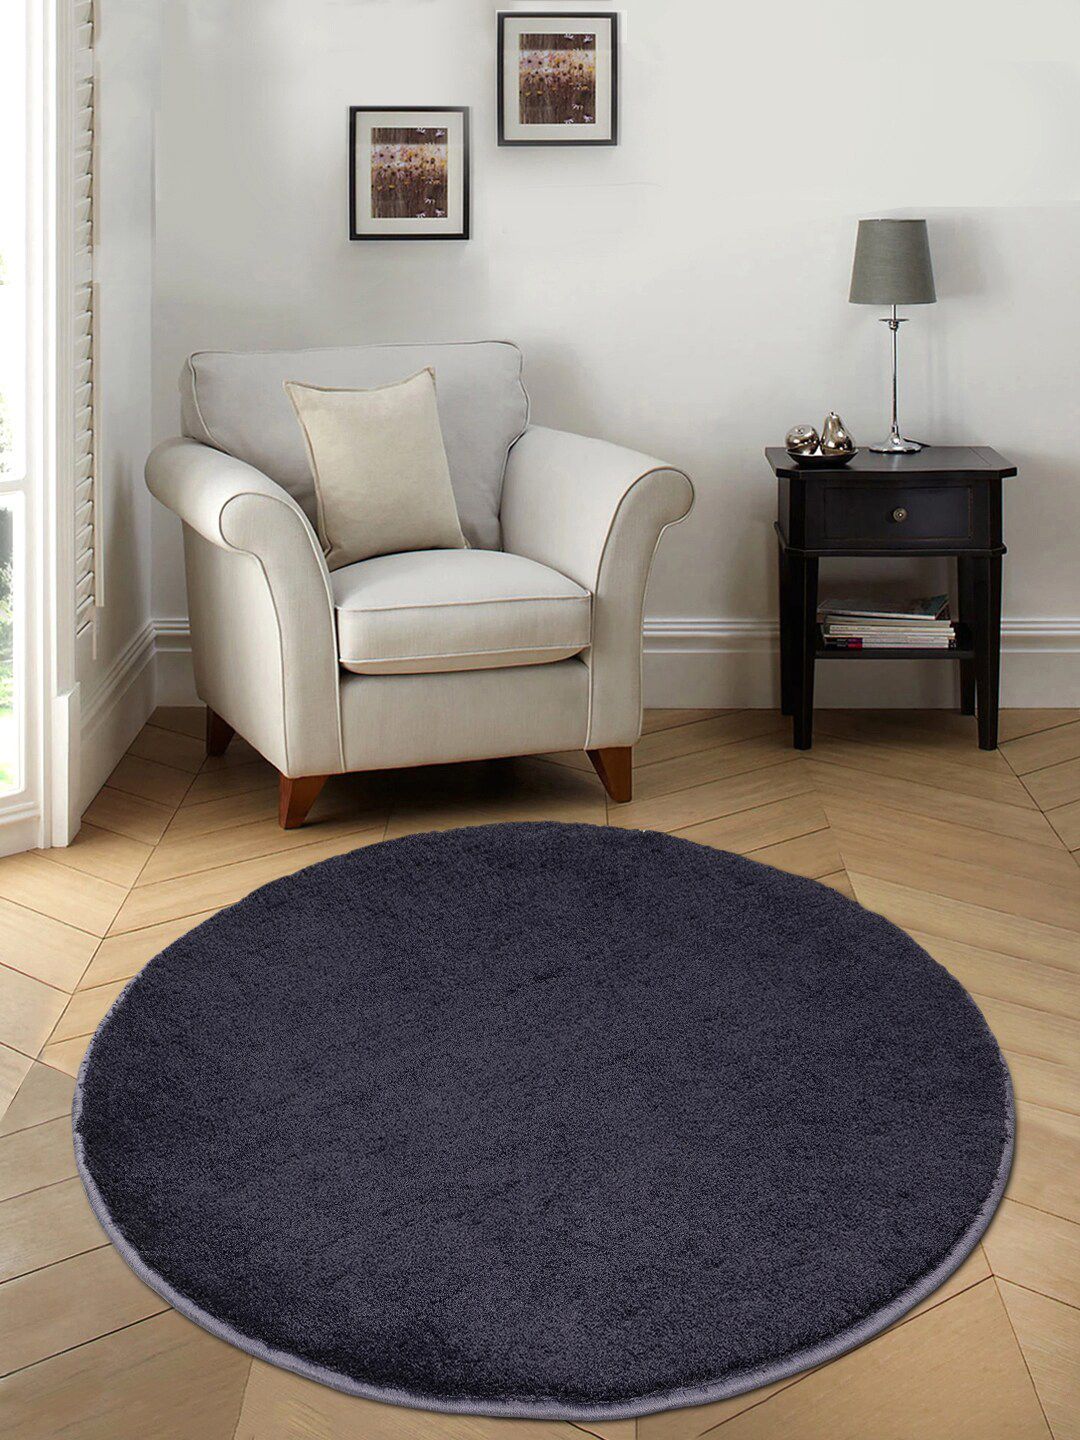 Saral Home Blue Solid Cotton Anti-Skid Round Floor Mats Price in India